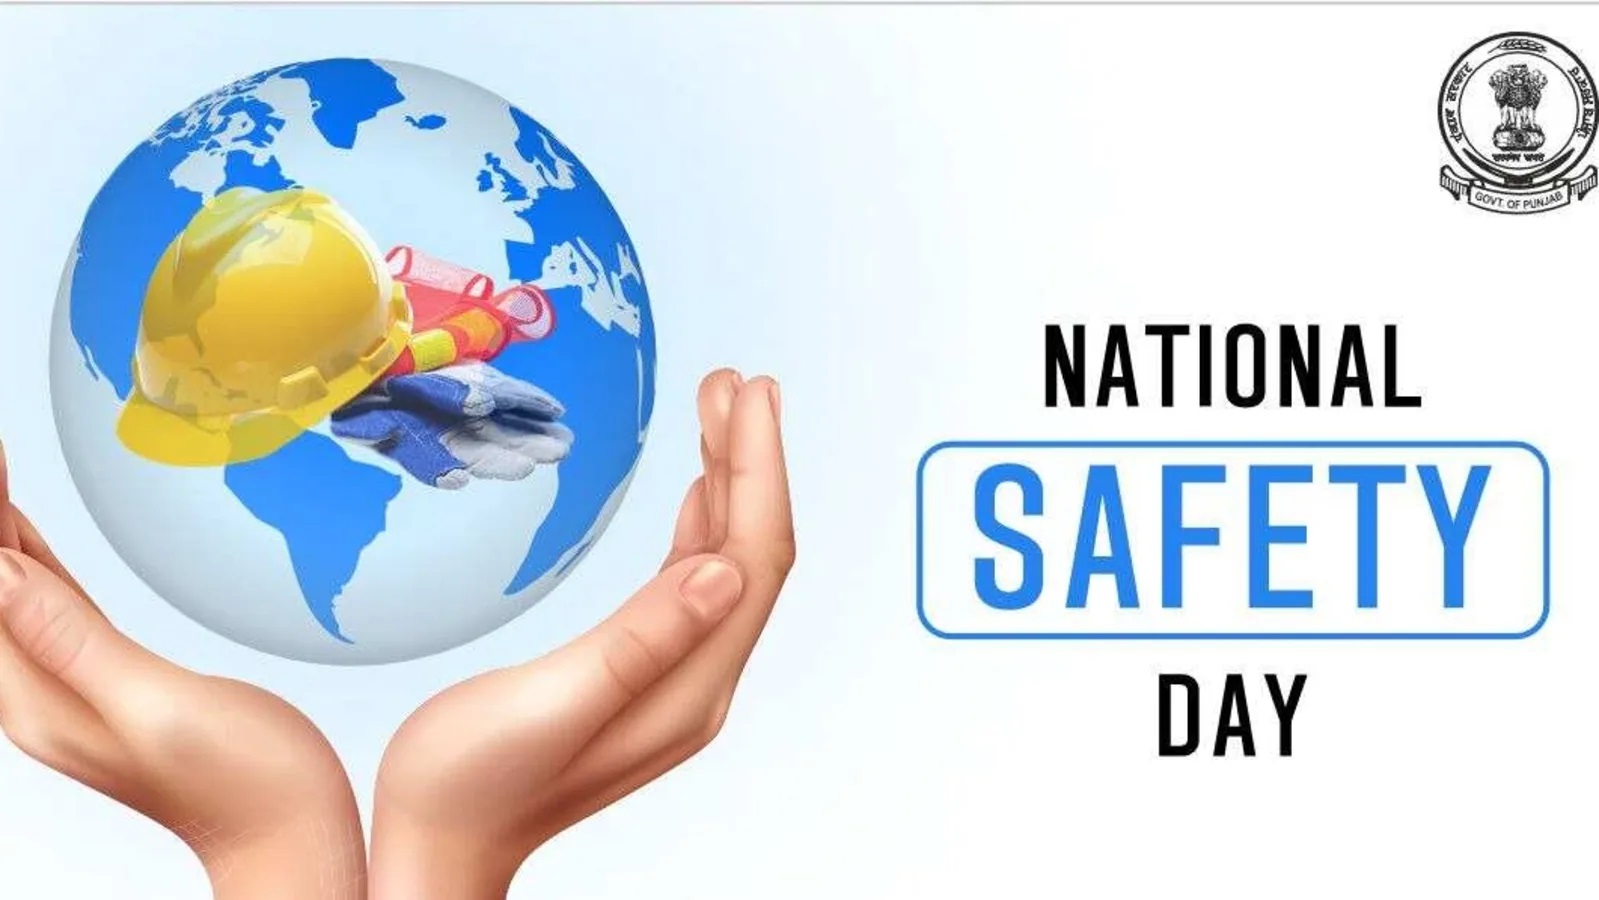 National Safety Day: Promoting Workplace Safety.